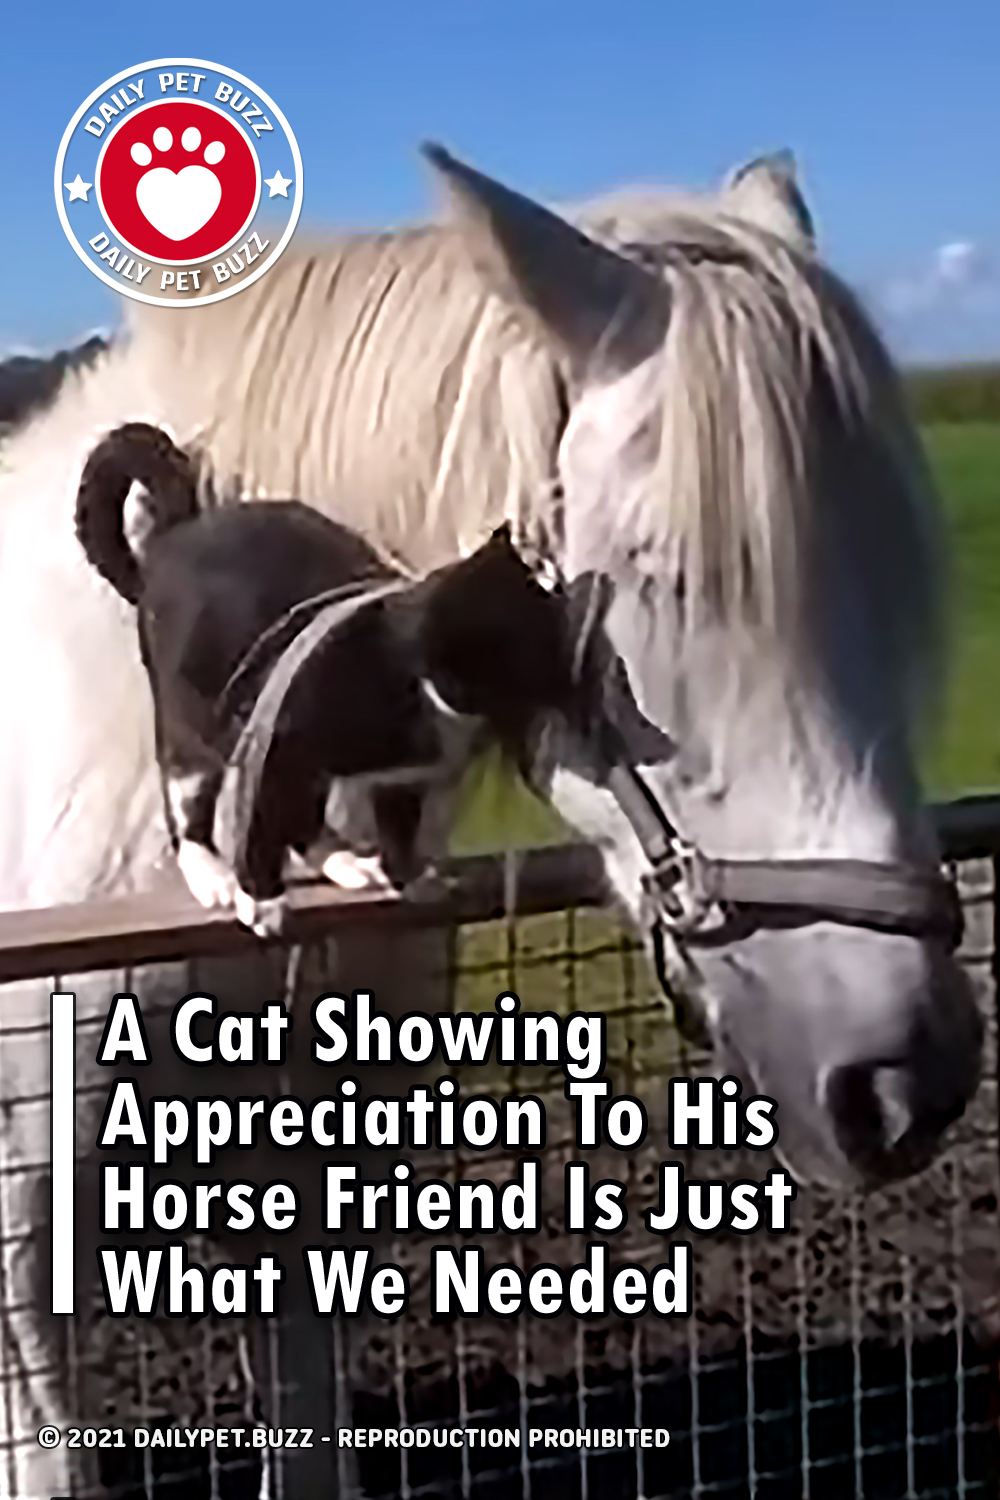 A Cat Showing Appreciation To His Horse Friend Is Just What We Needed